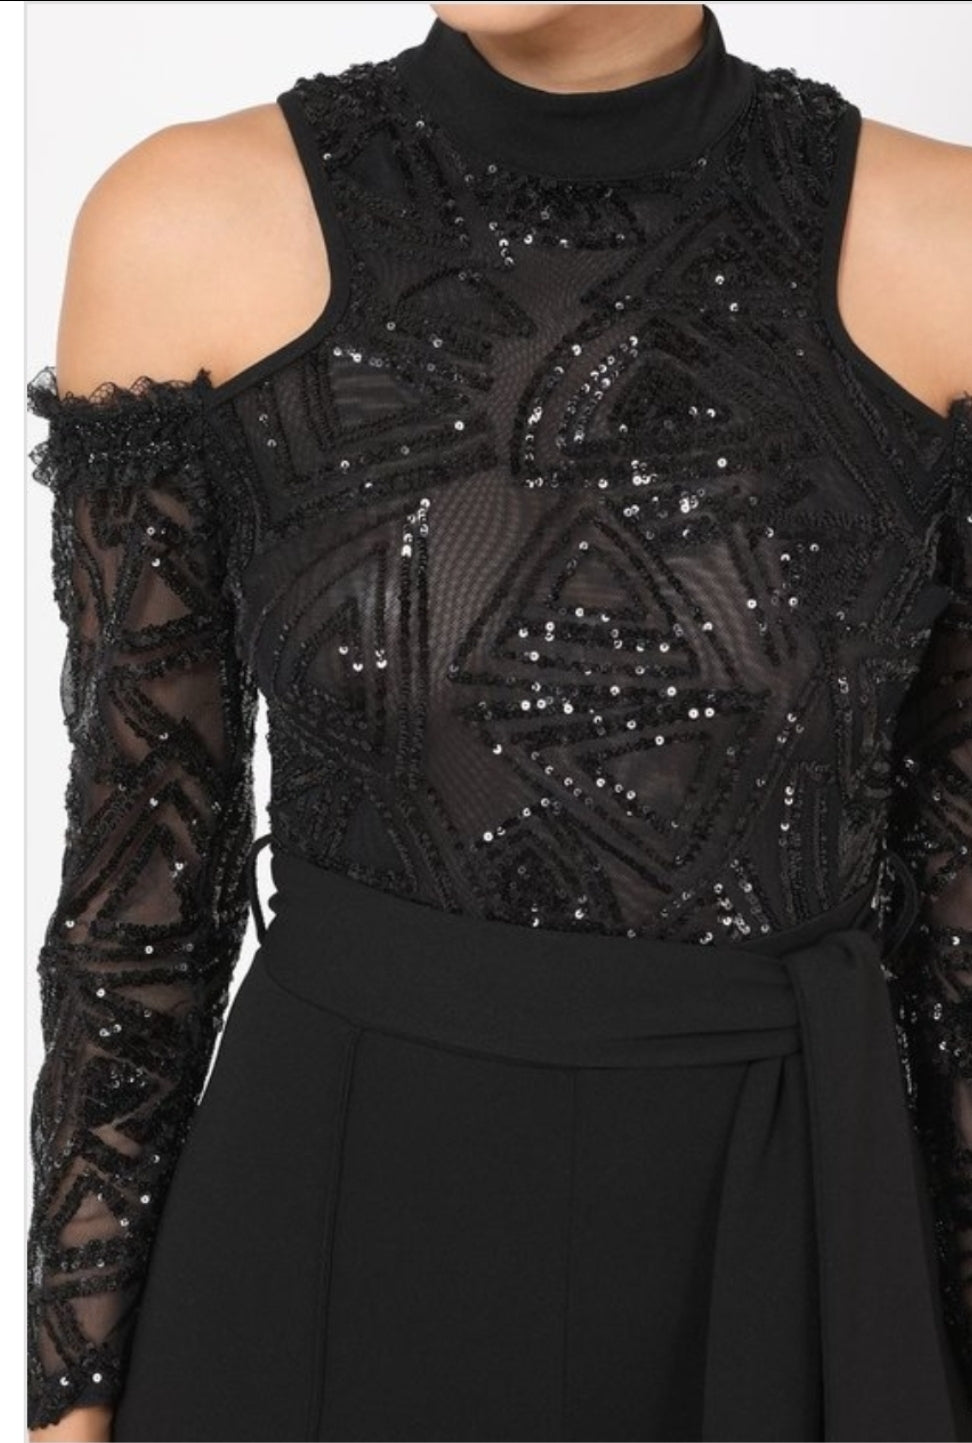 Your Night Sequined Black Sexy Jumpsuit!